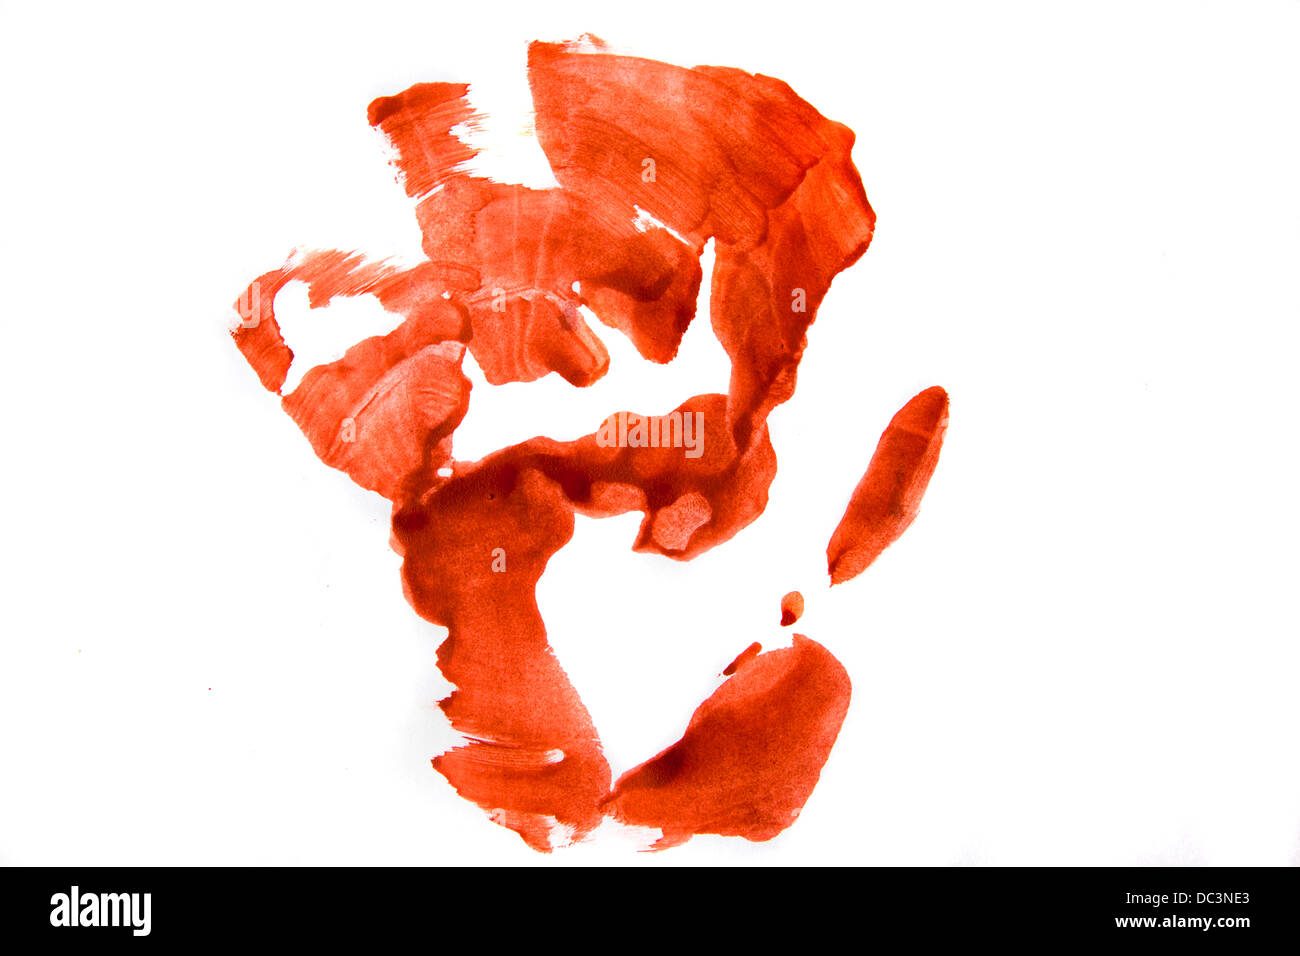 Bloodly red hand print isolated on white background. Stock Photo